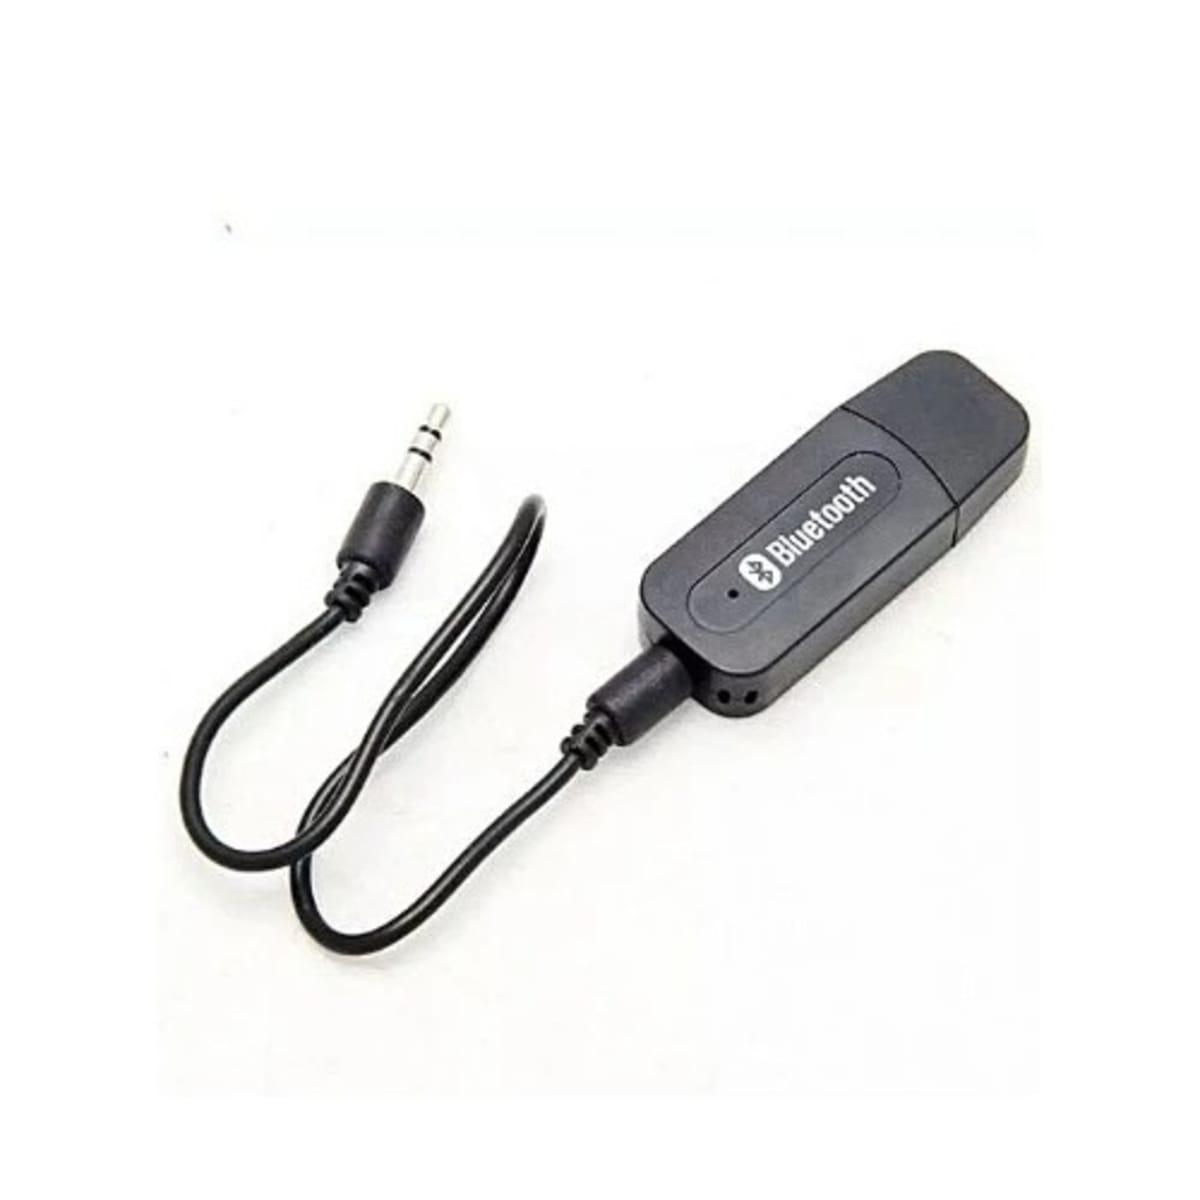 Usb Bluetooth Music Audio Receiver Dongle Adapter 3.5mm Jack Audio Cable -  Black